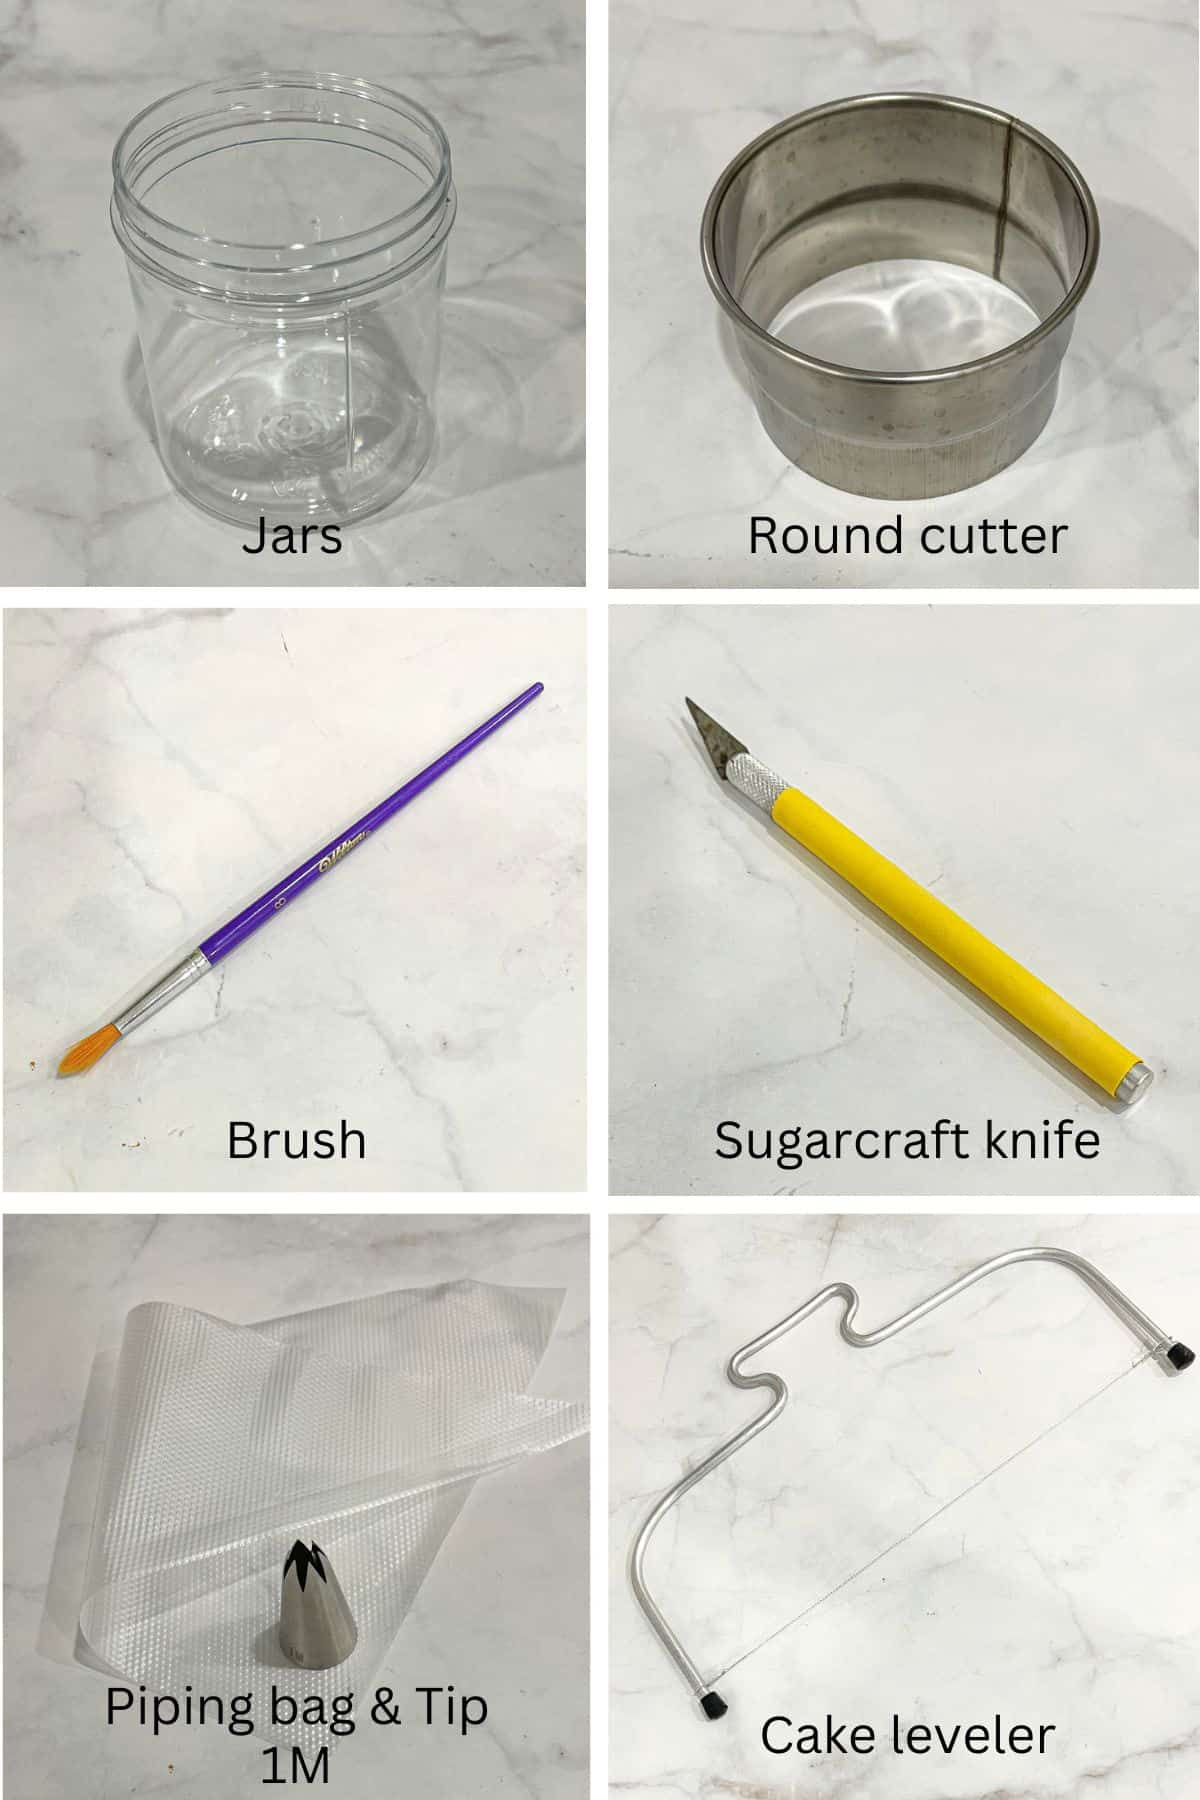 A round plastic jar, a round cutter, a brush, a sugarcraft knife, a piping bag and star tip and a cake leveler against marble background.